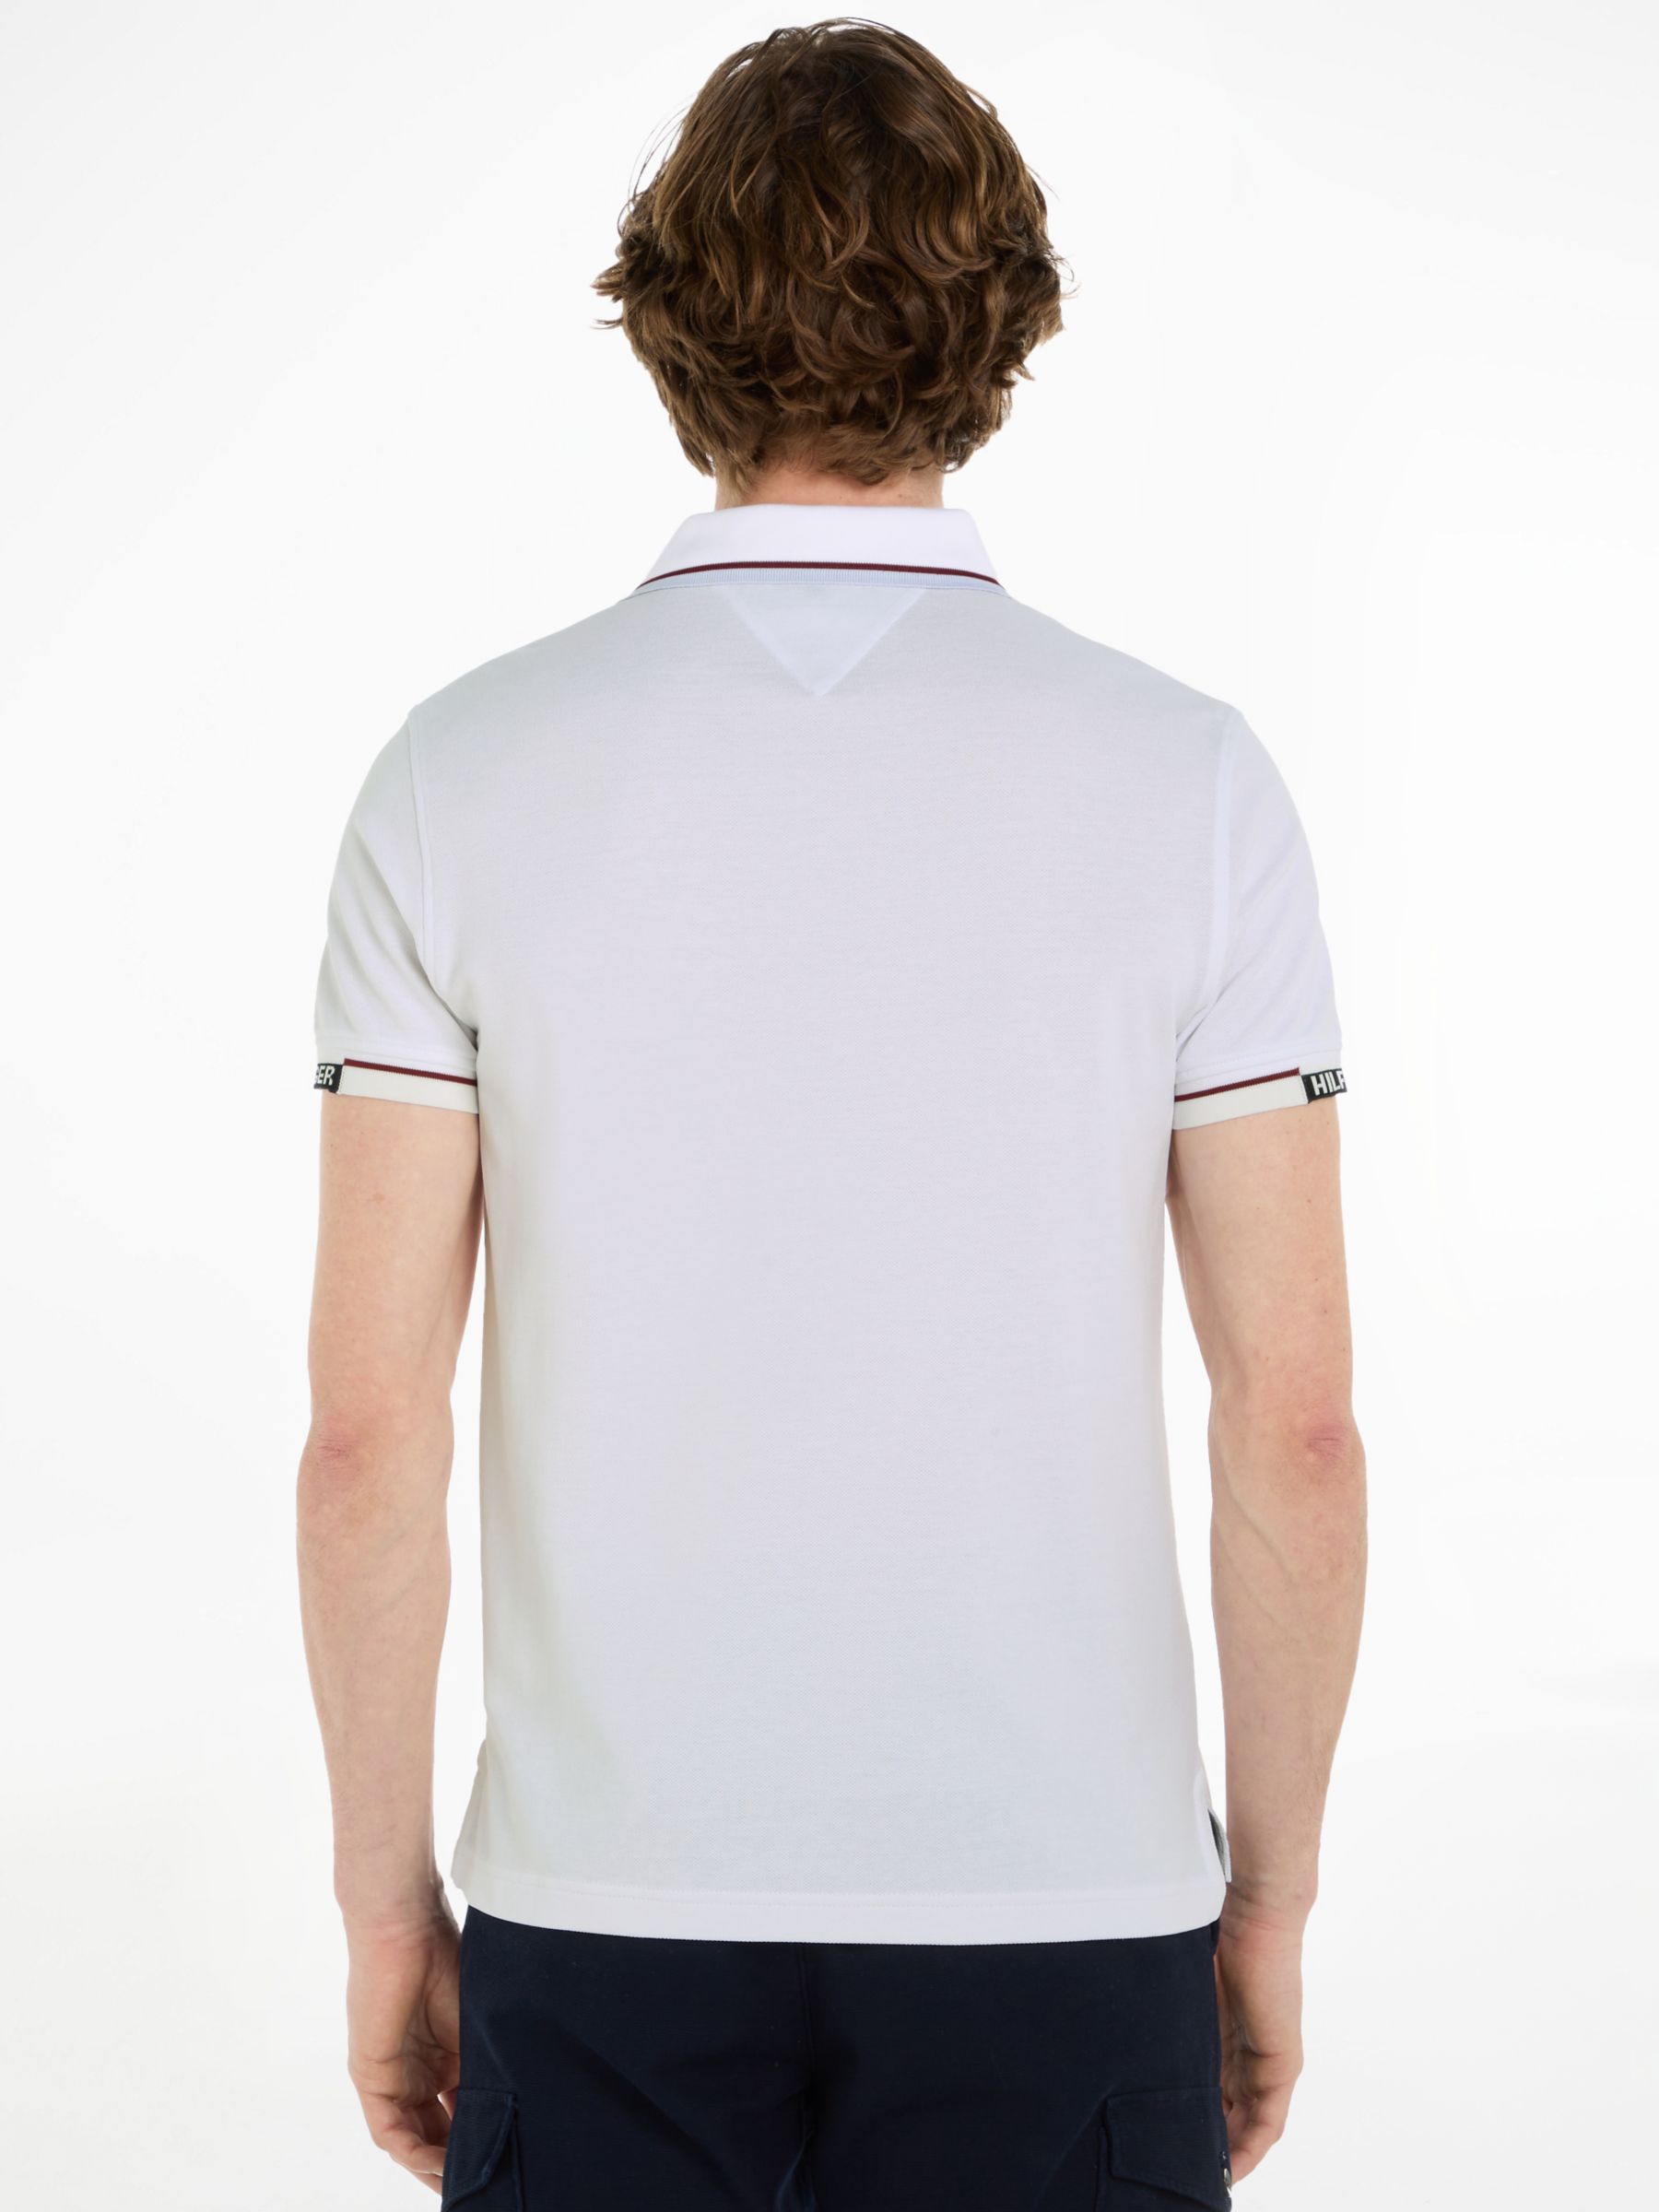 Tommy Hilfiger Cuff Slim Fit Polo Top, White at John Lewis & Partners